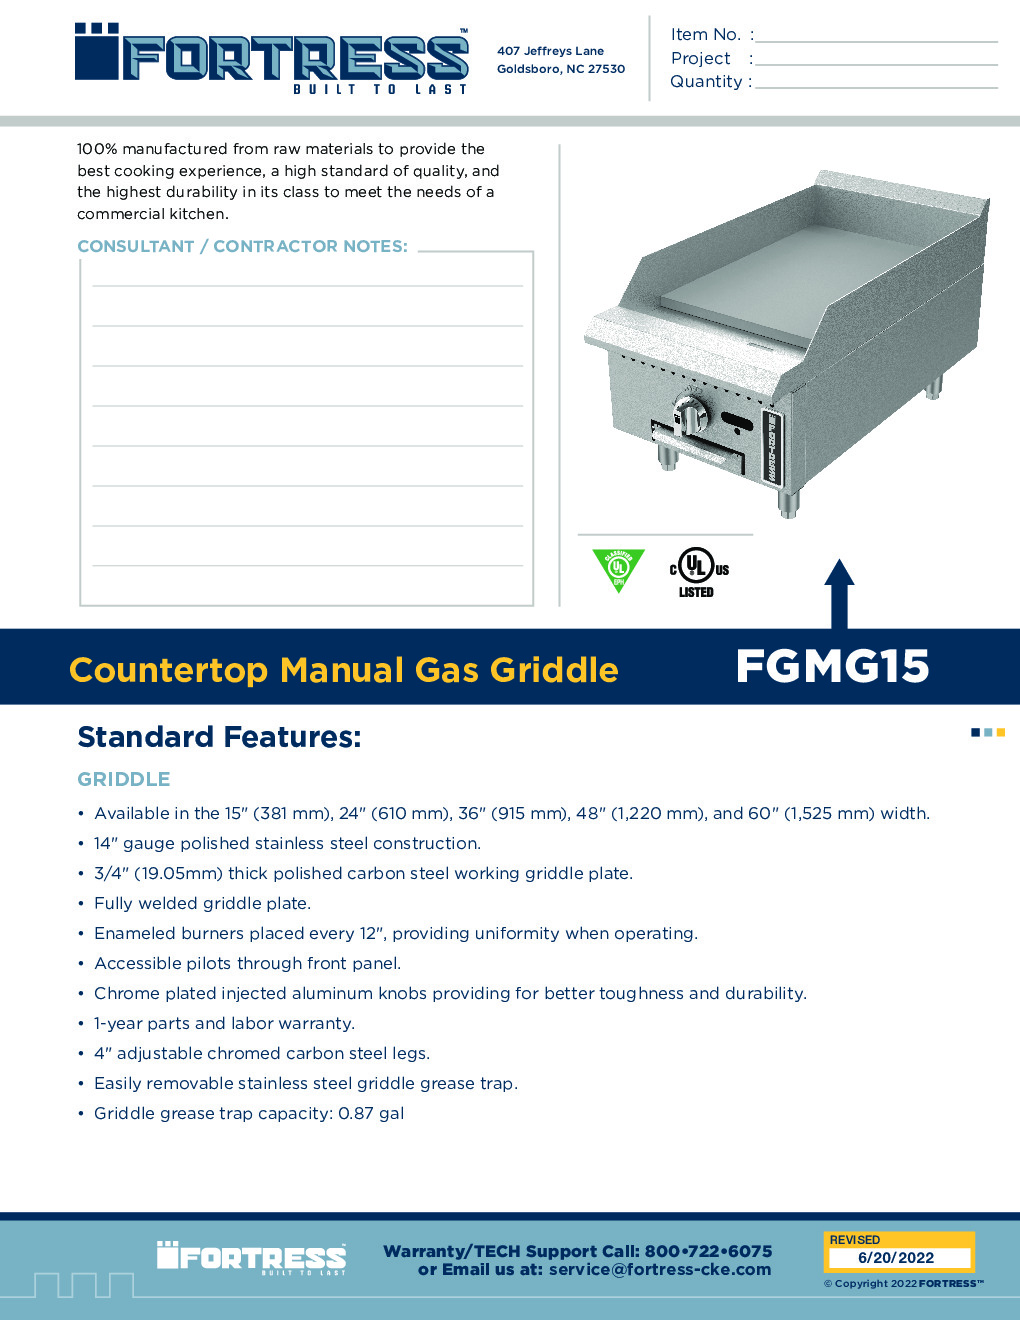 Fortress FGTG15 Countertop Gas Griddle